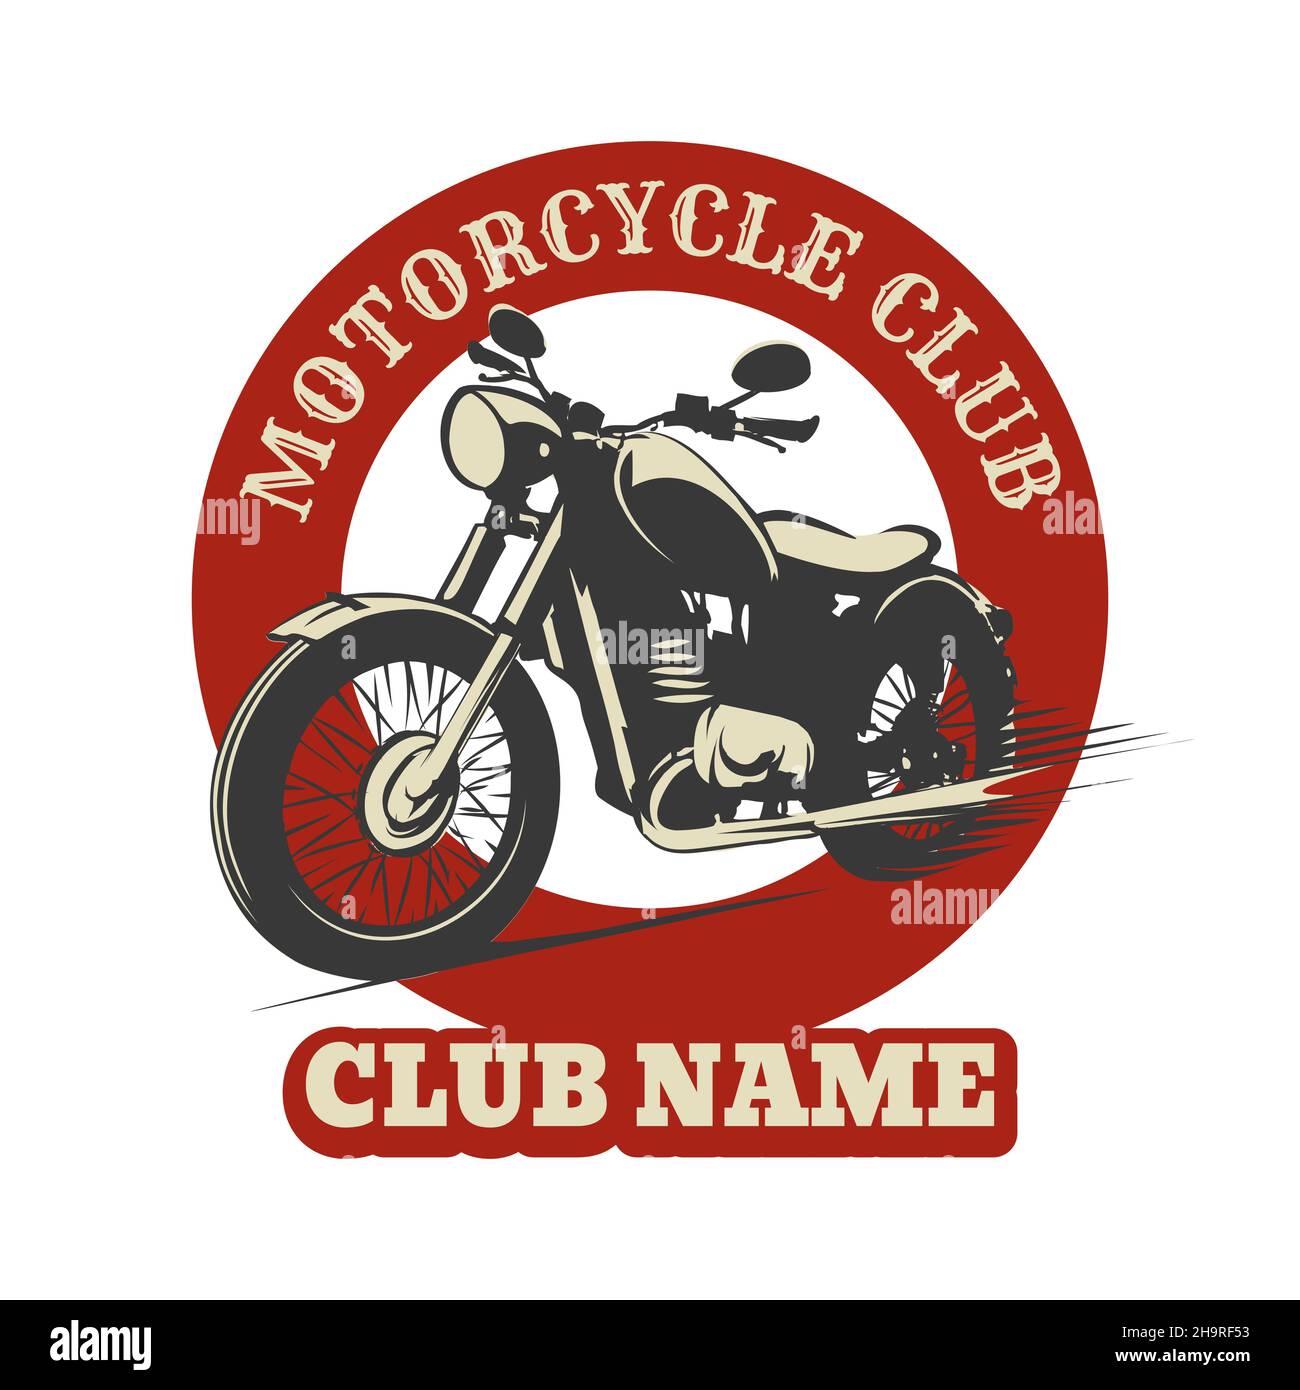 Emblem of Motorcycle Club drawn in Retro style isolated on white. Vector illustration. Stock Vector